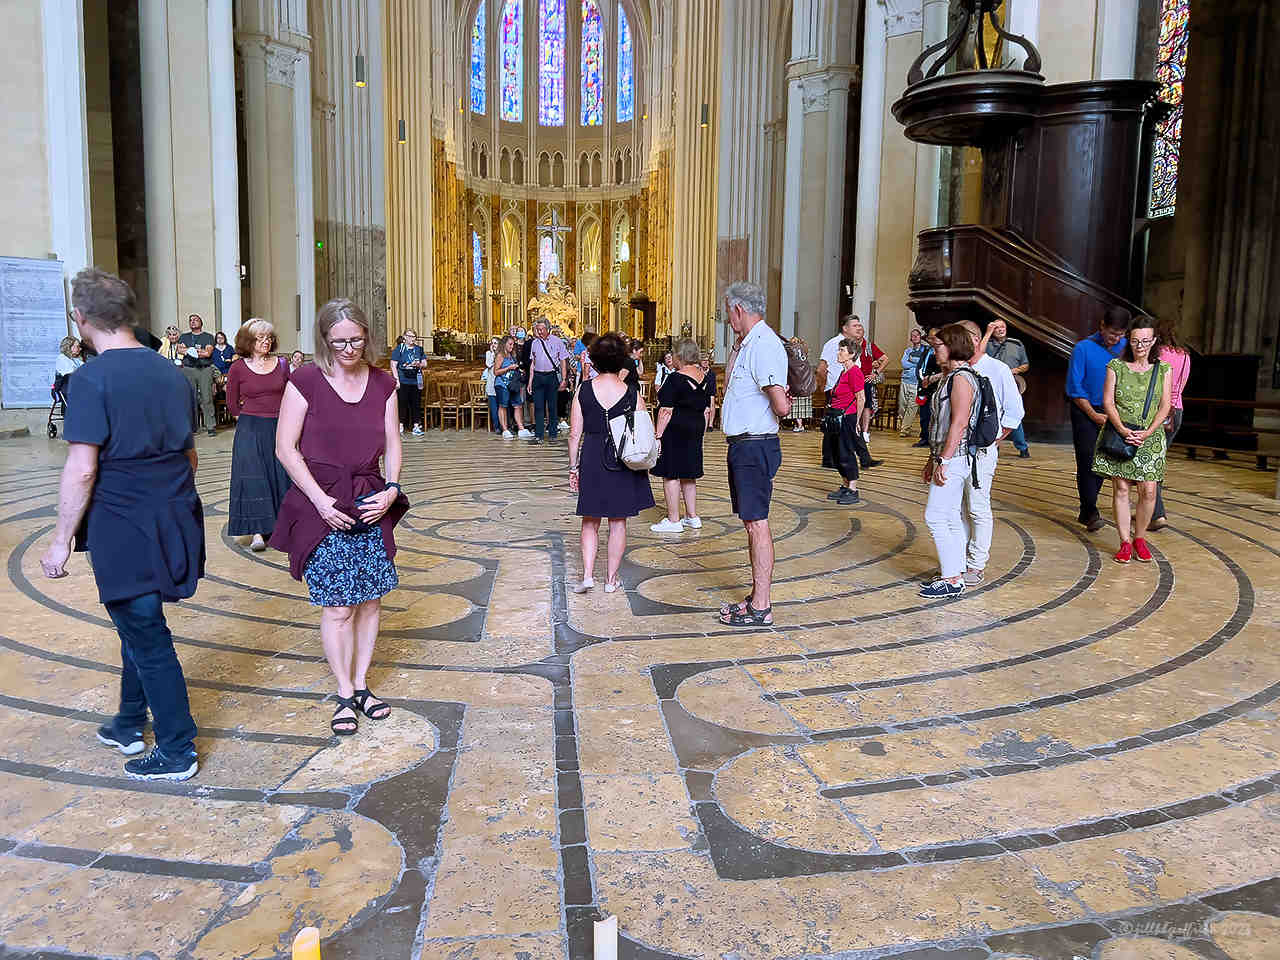 An open walk on the labyrinth in the Chartres Cathedral